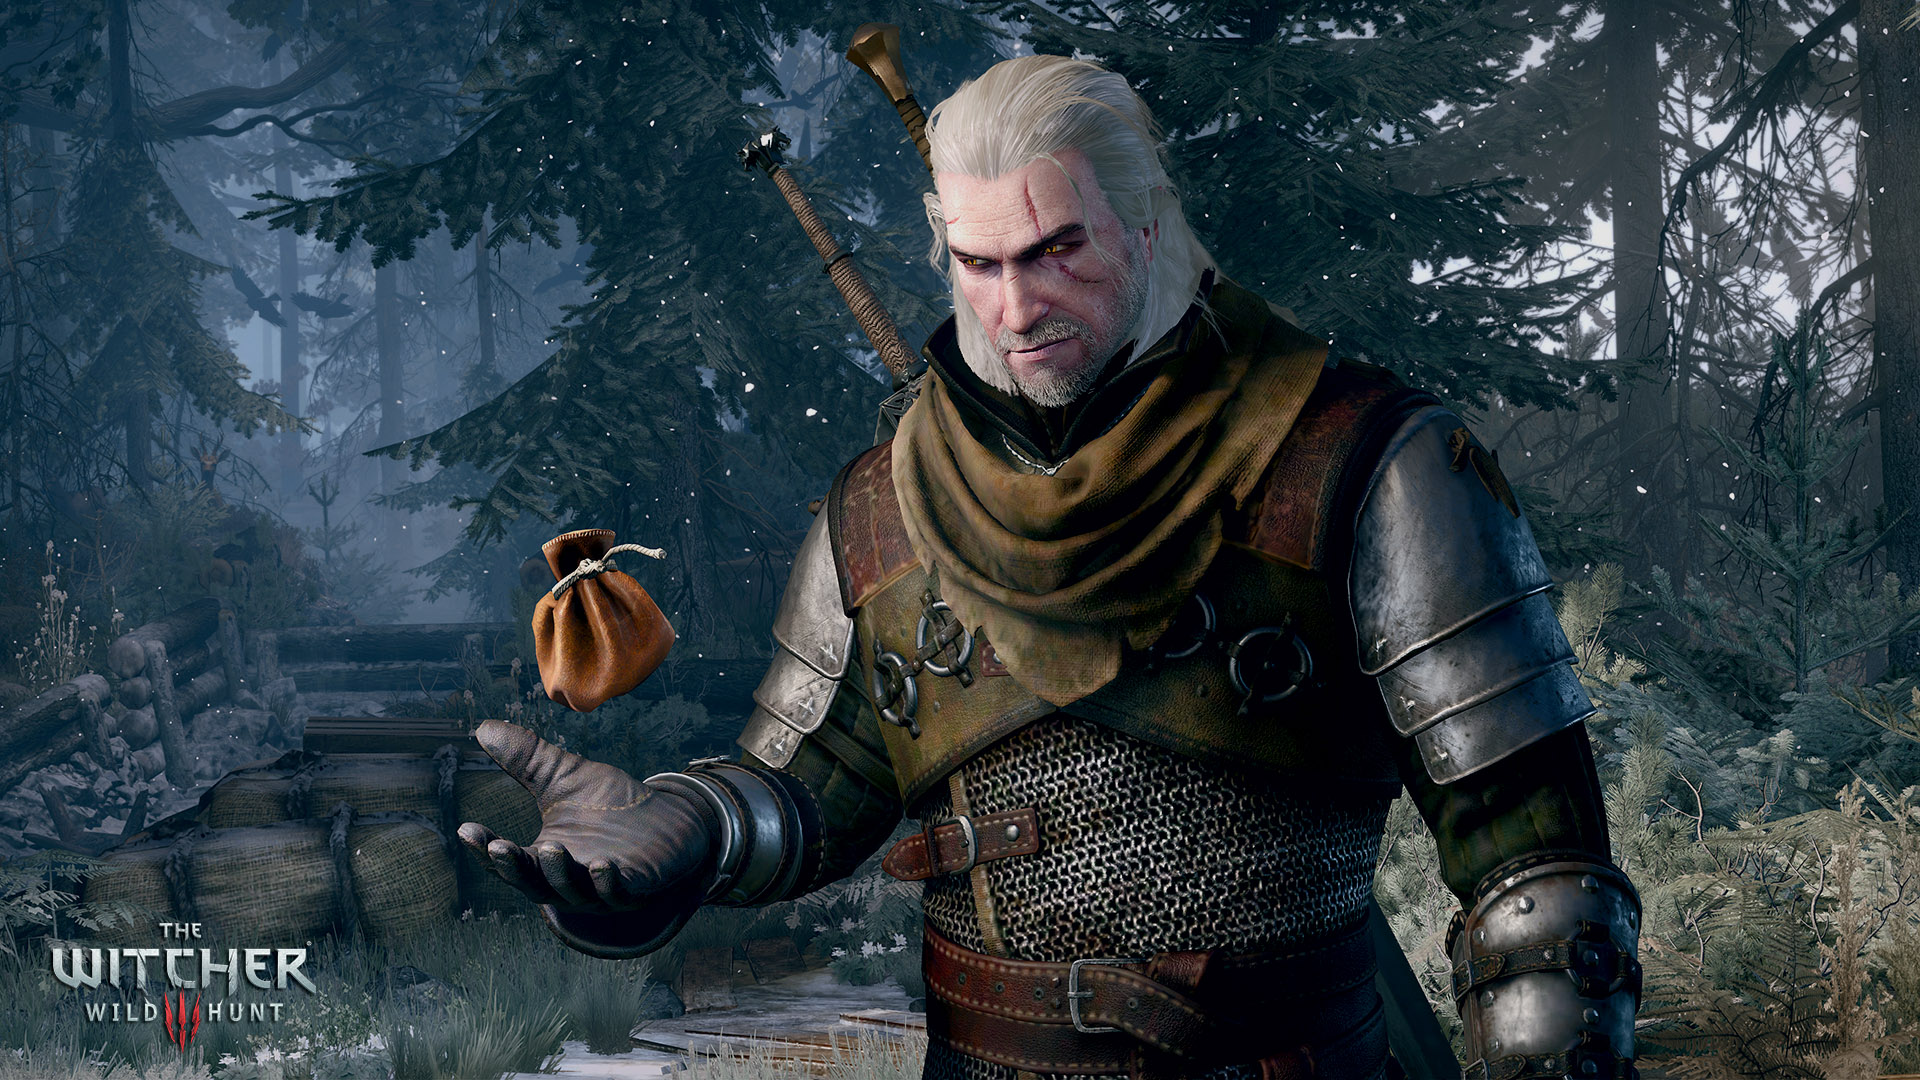 The Witcher 3 Sells 4 Million Units In Two Weeks